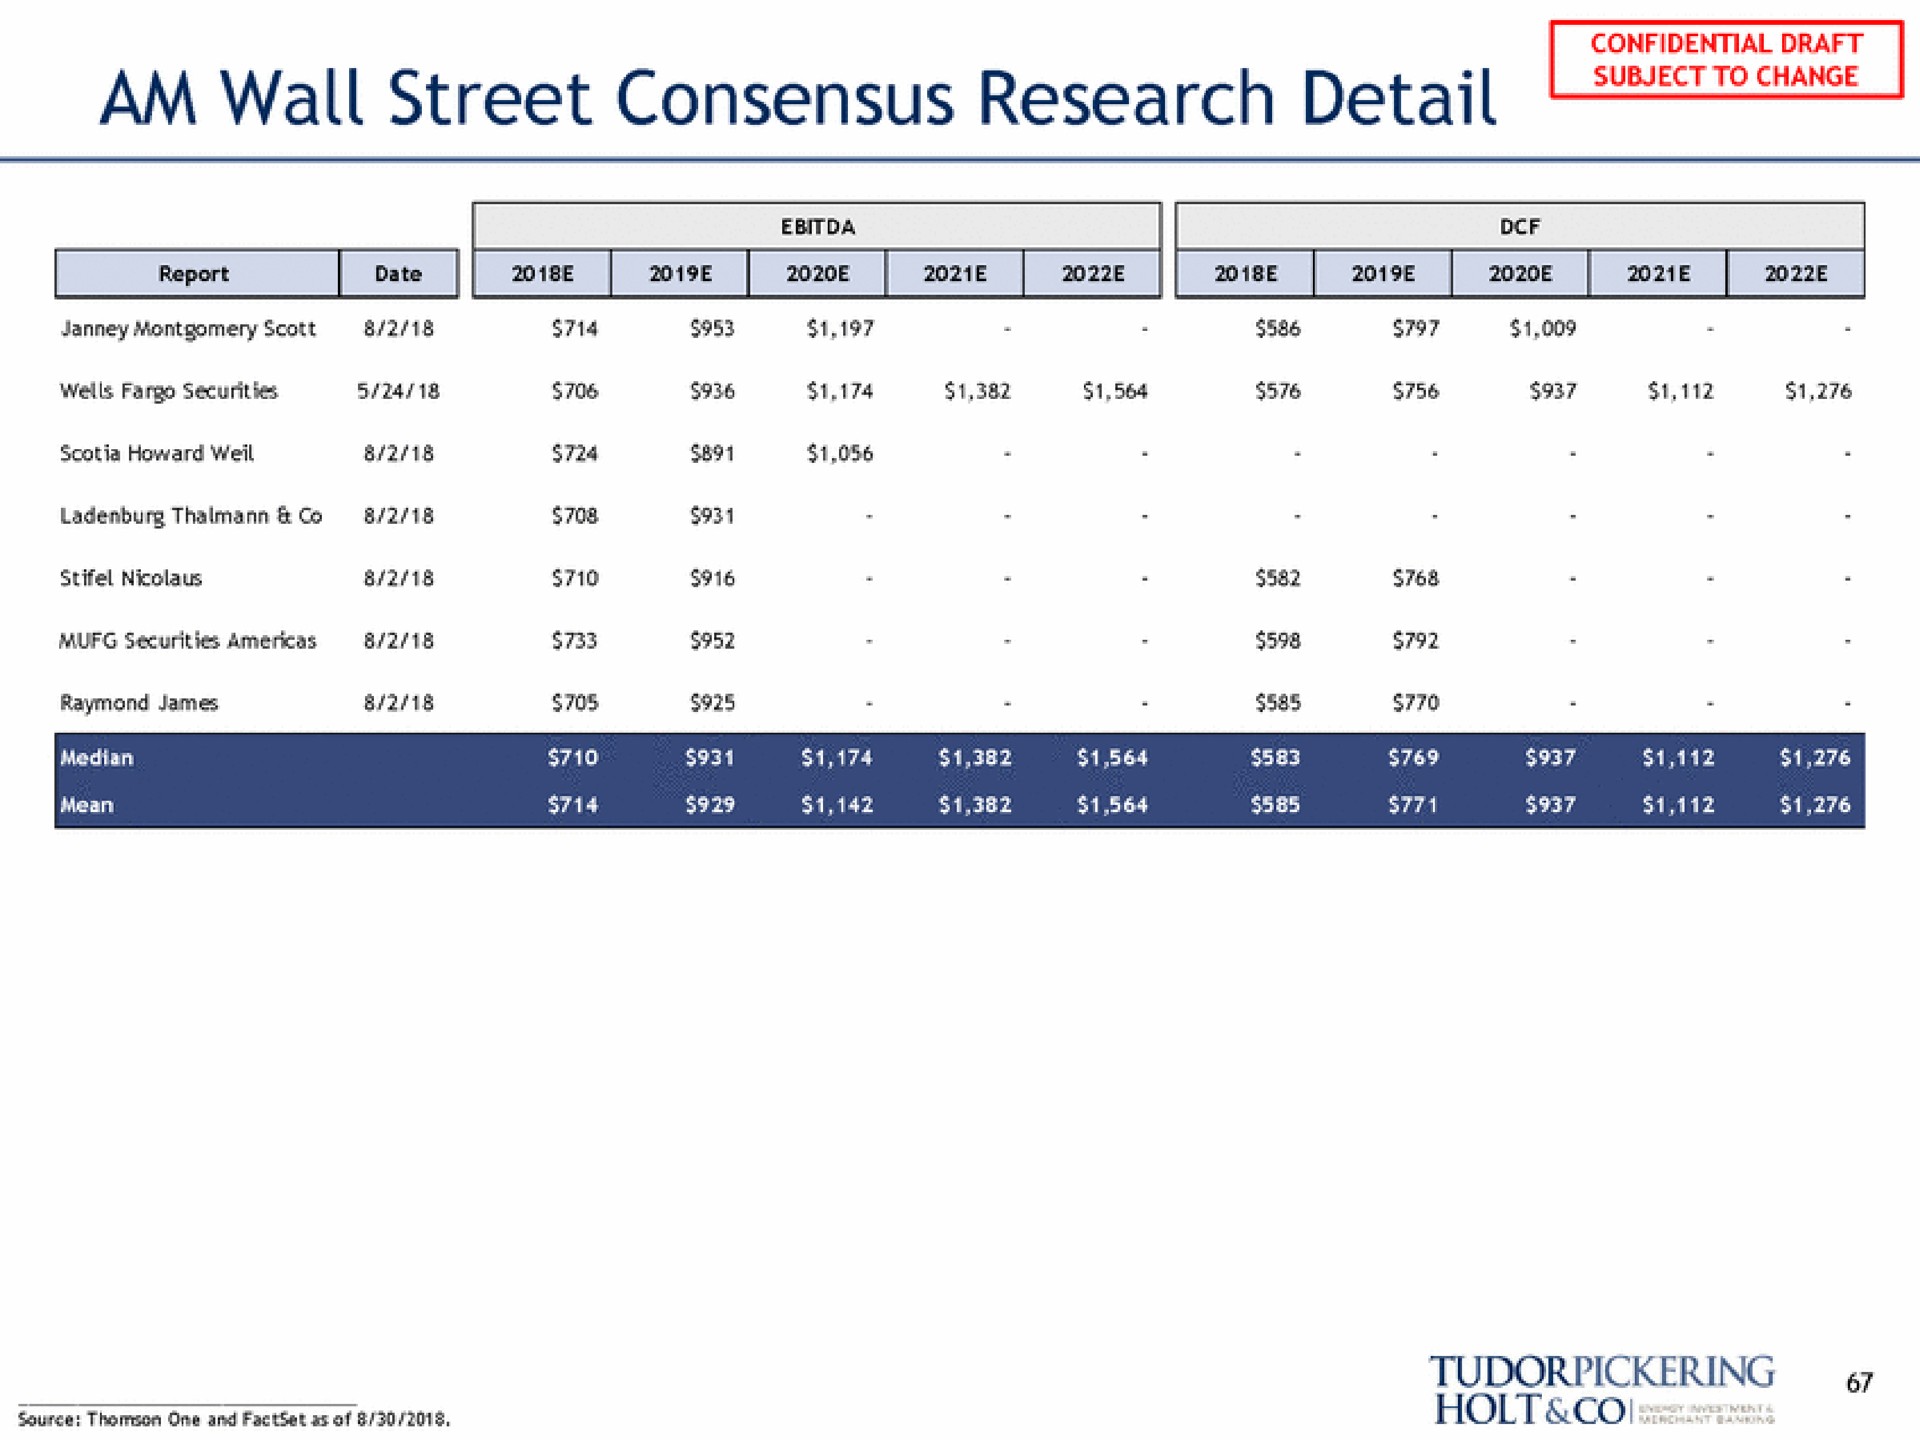 am wall street consensus research detail holt col | Tudor, Pickering, Holt & Co